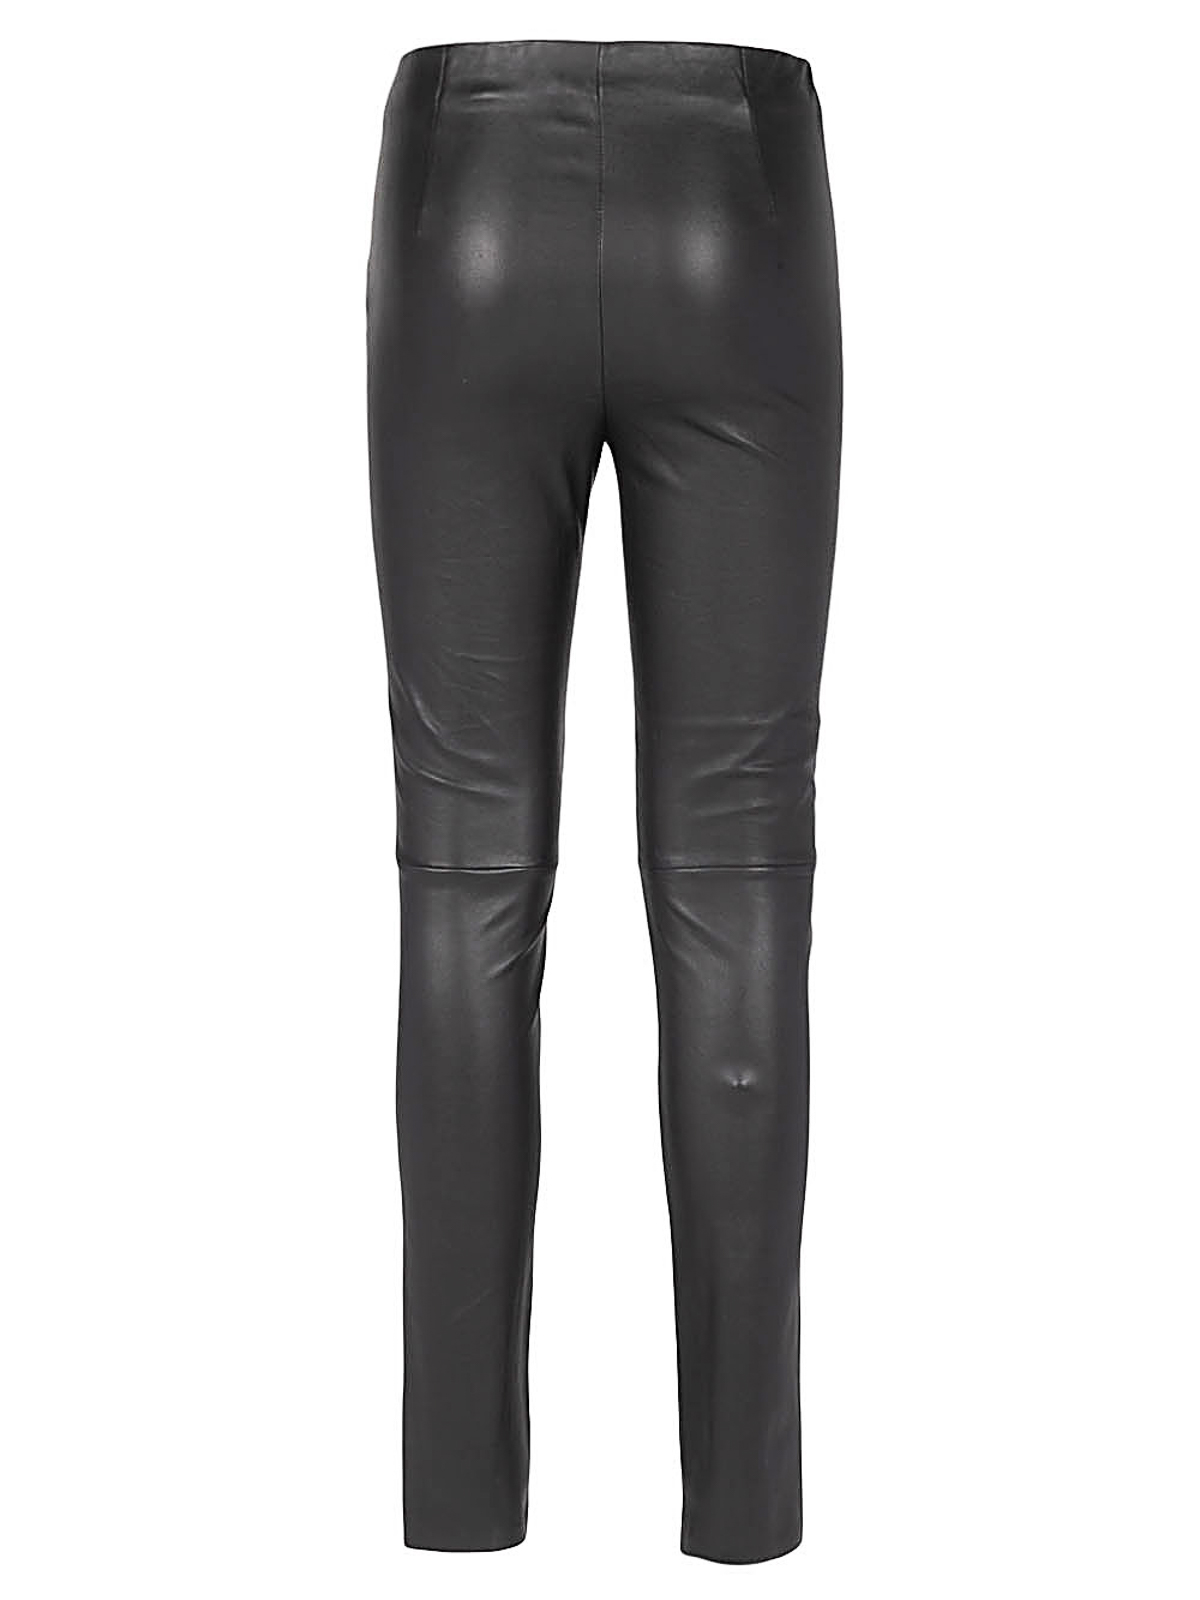 Buy Gap Mid Rise Faux-Leather Trousers from the Gap online shop